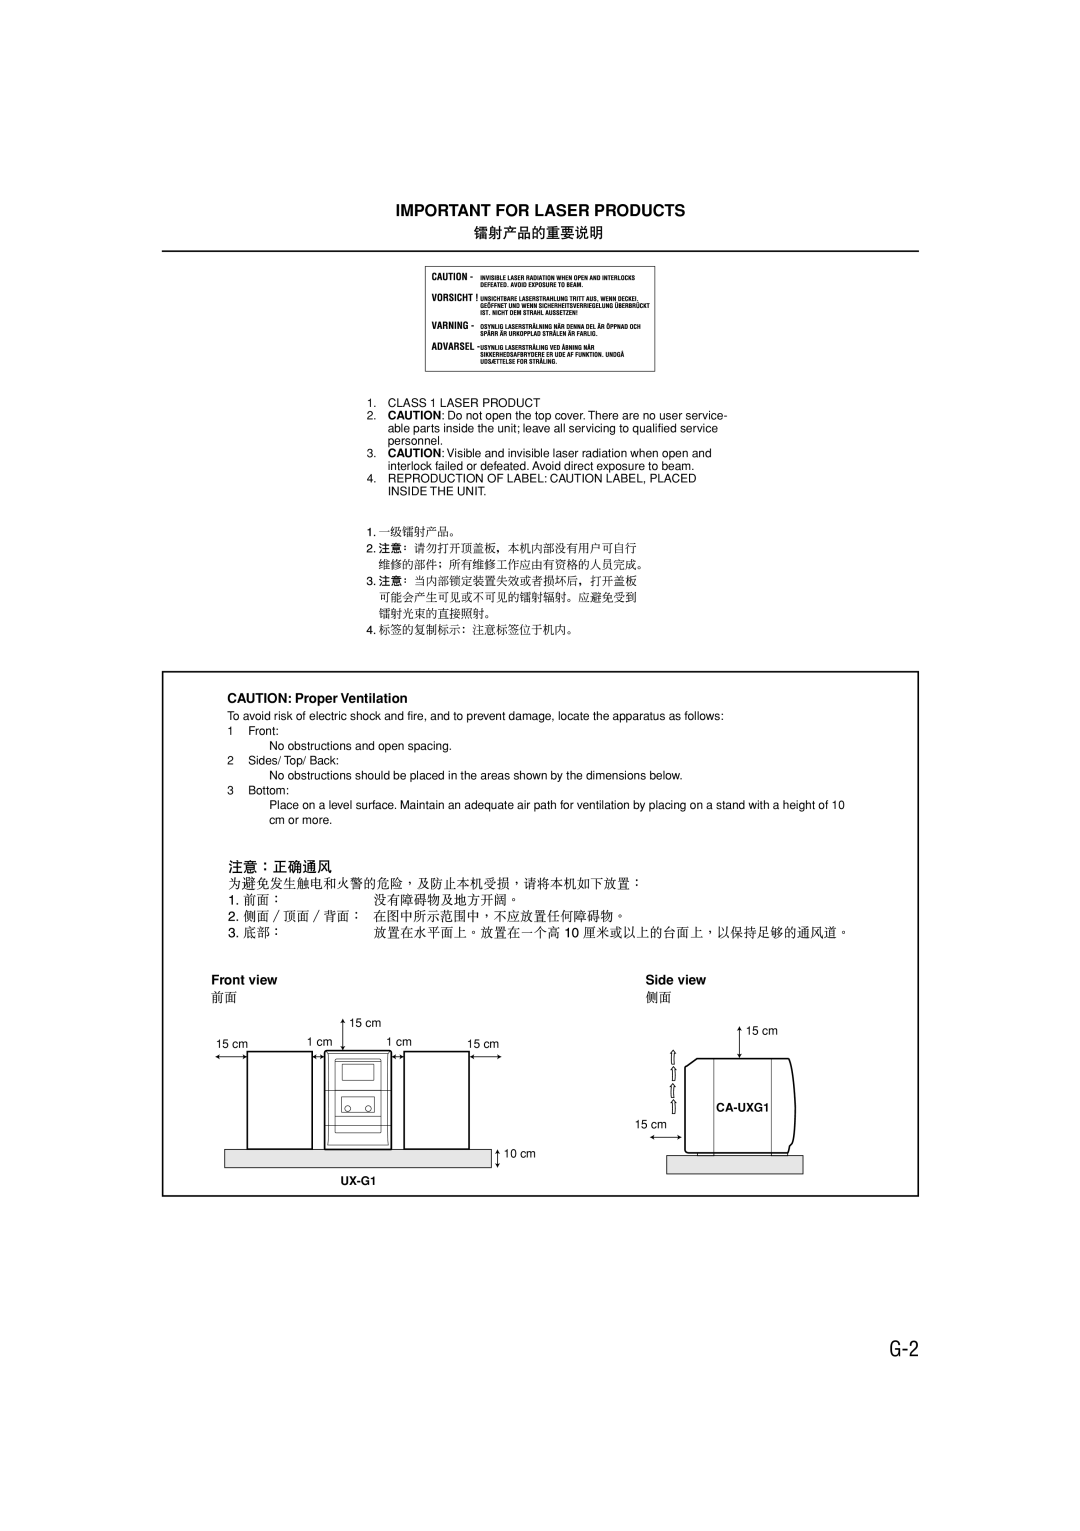 JVC LVT1356-005A manual Important For Laser Products, CAUTION Proper Ventilation, Front view, Side view, UX-G1, CA-UXG1 